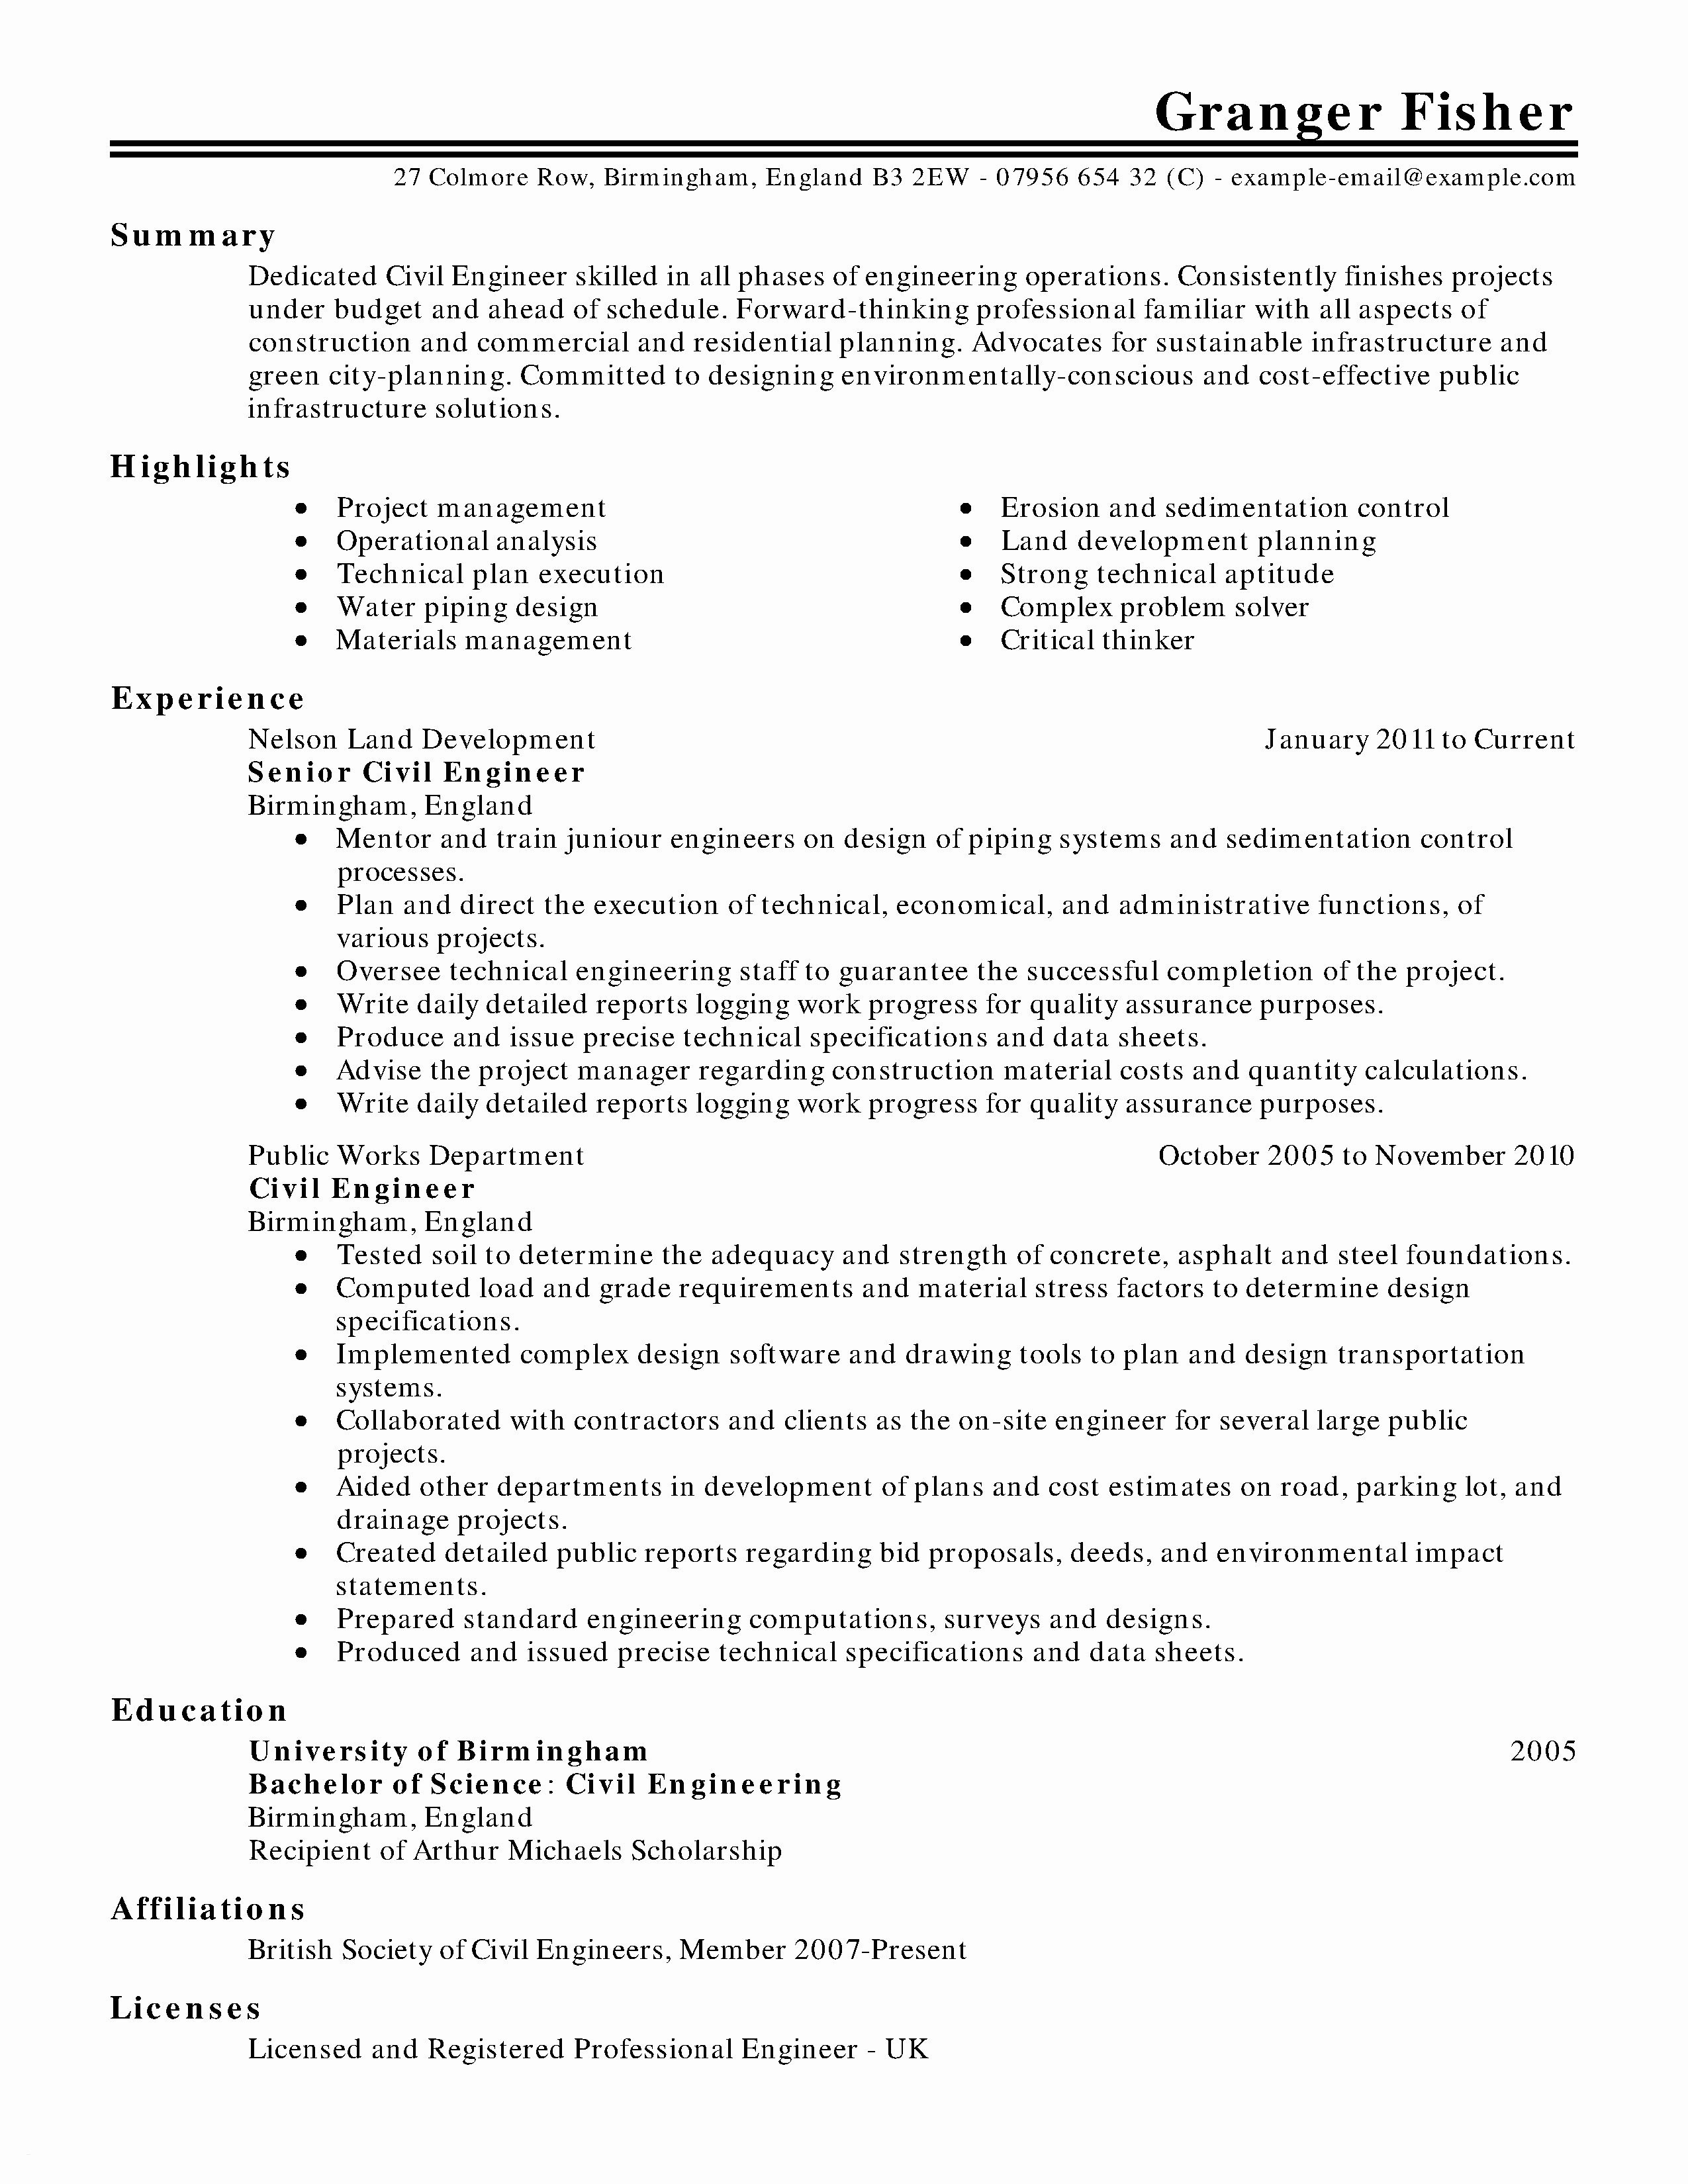 Loan Application Letter Template - Job Letter for Mortgage Inspirationa Fill In Resume Unique New Cover